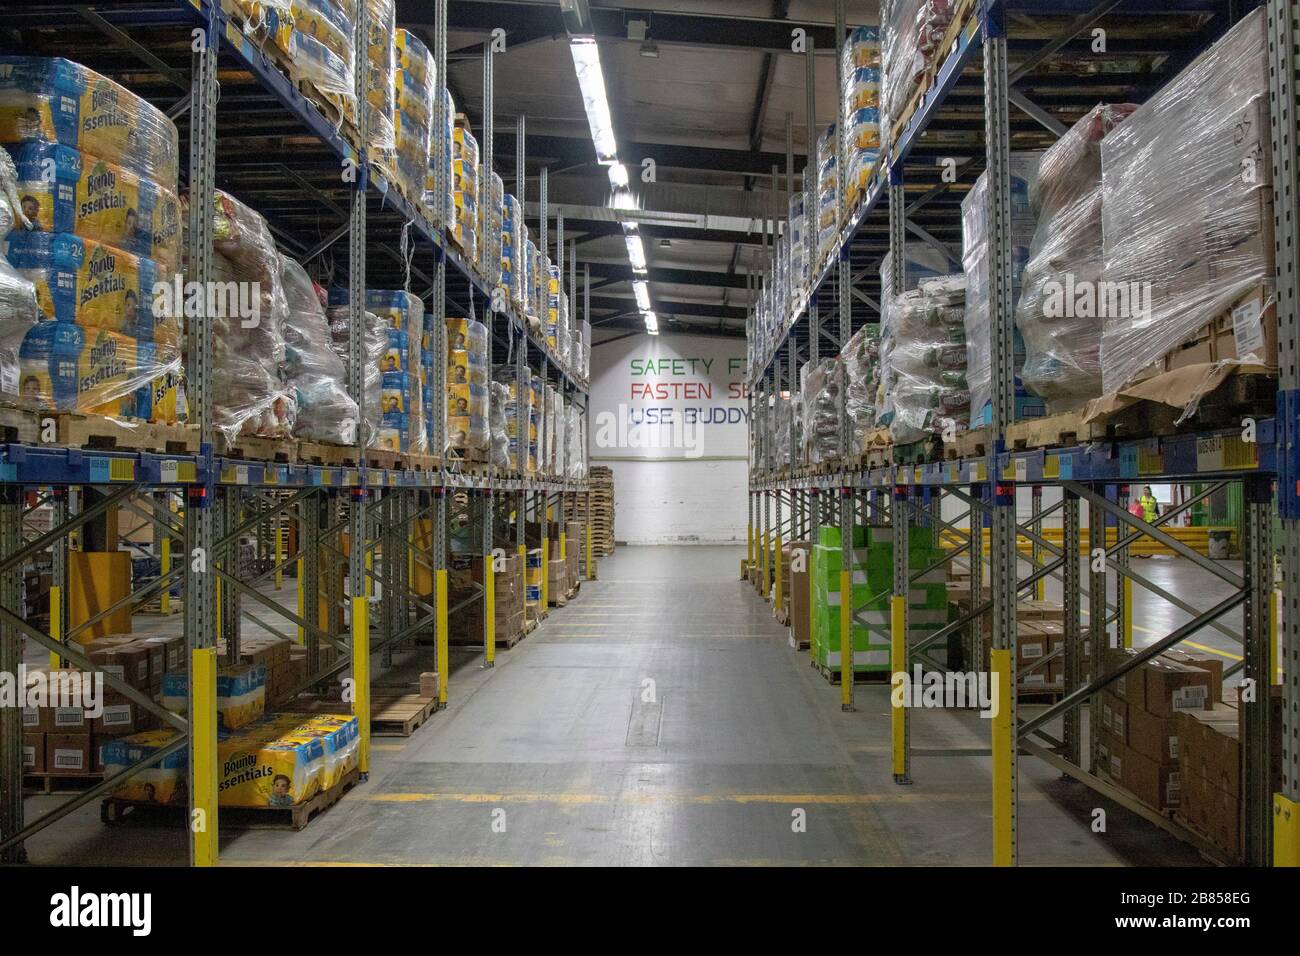 Semi-perishable goods sit on shelves at the Germersheim Central Distribution Center in Germersheim, Germany, March 17, 2019.  The center is over 600,000 square feet with a capacity of over 9,000 items. (U.S. Army photo by Staff Sgt. Ryan Rayno, 7th Mobile Public Affairs Detachment) Stock Photo